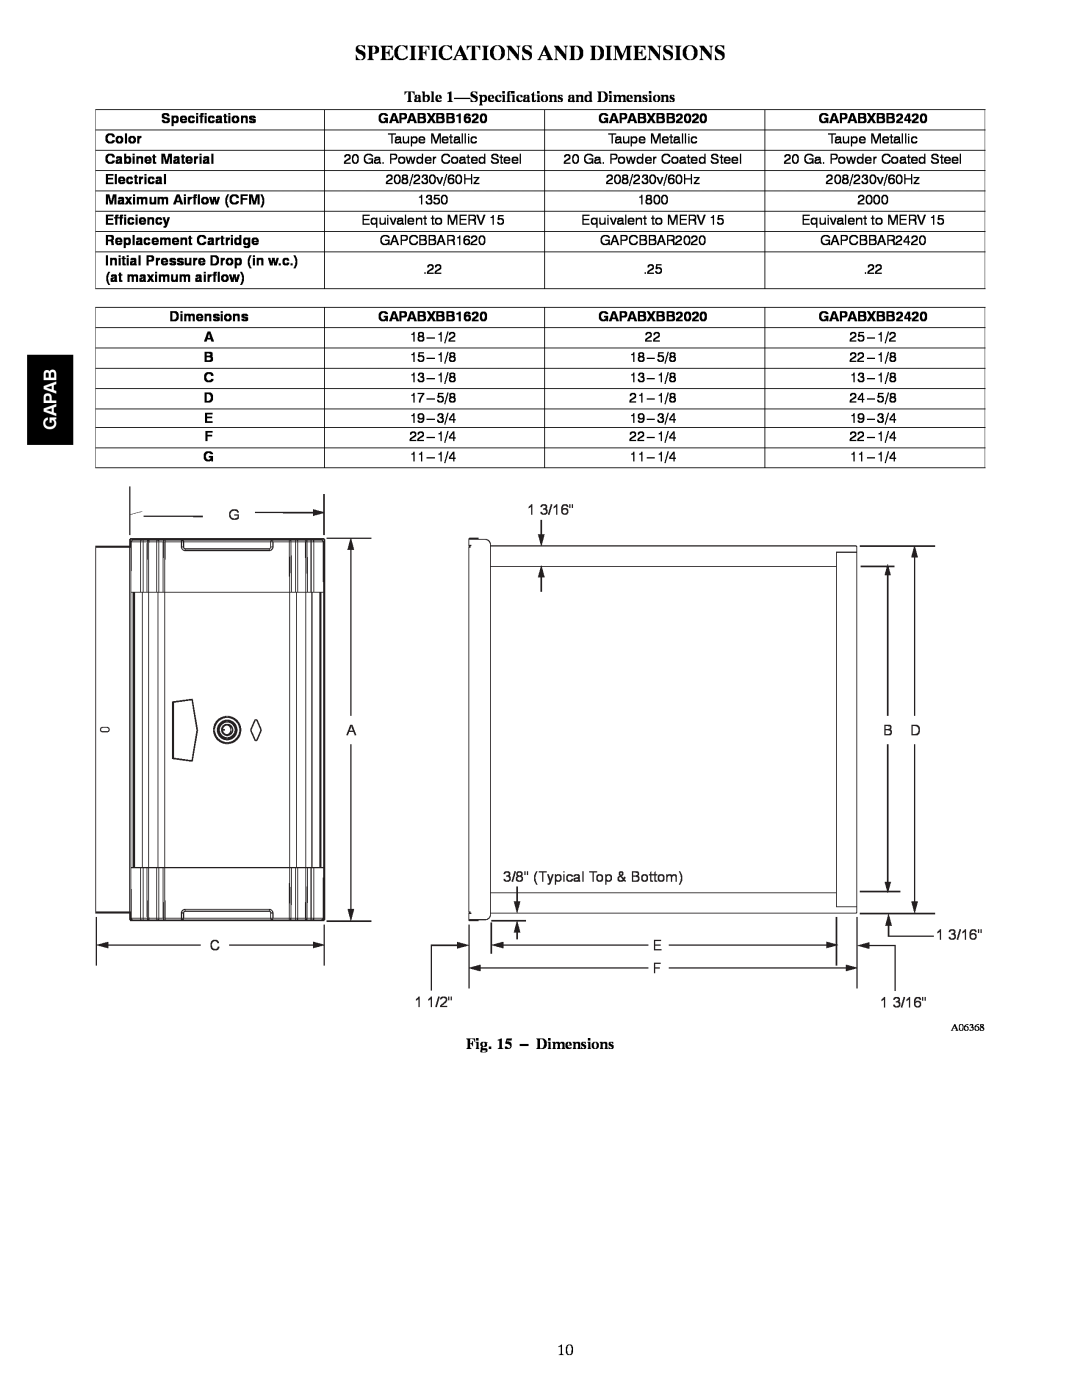 Bryant 1620, 2420, 2020 installation instructions Specifications And Dimensions, Gapab 